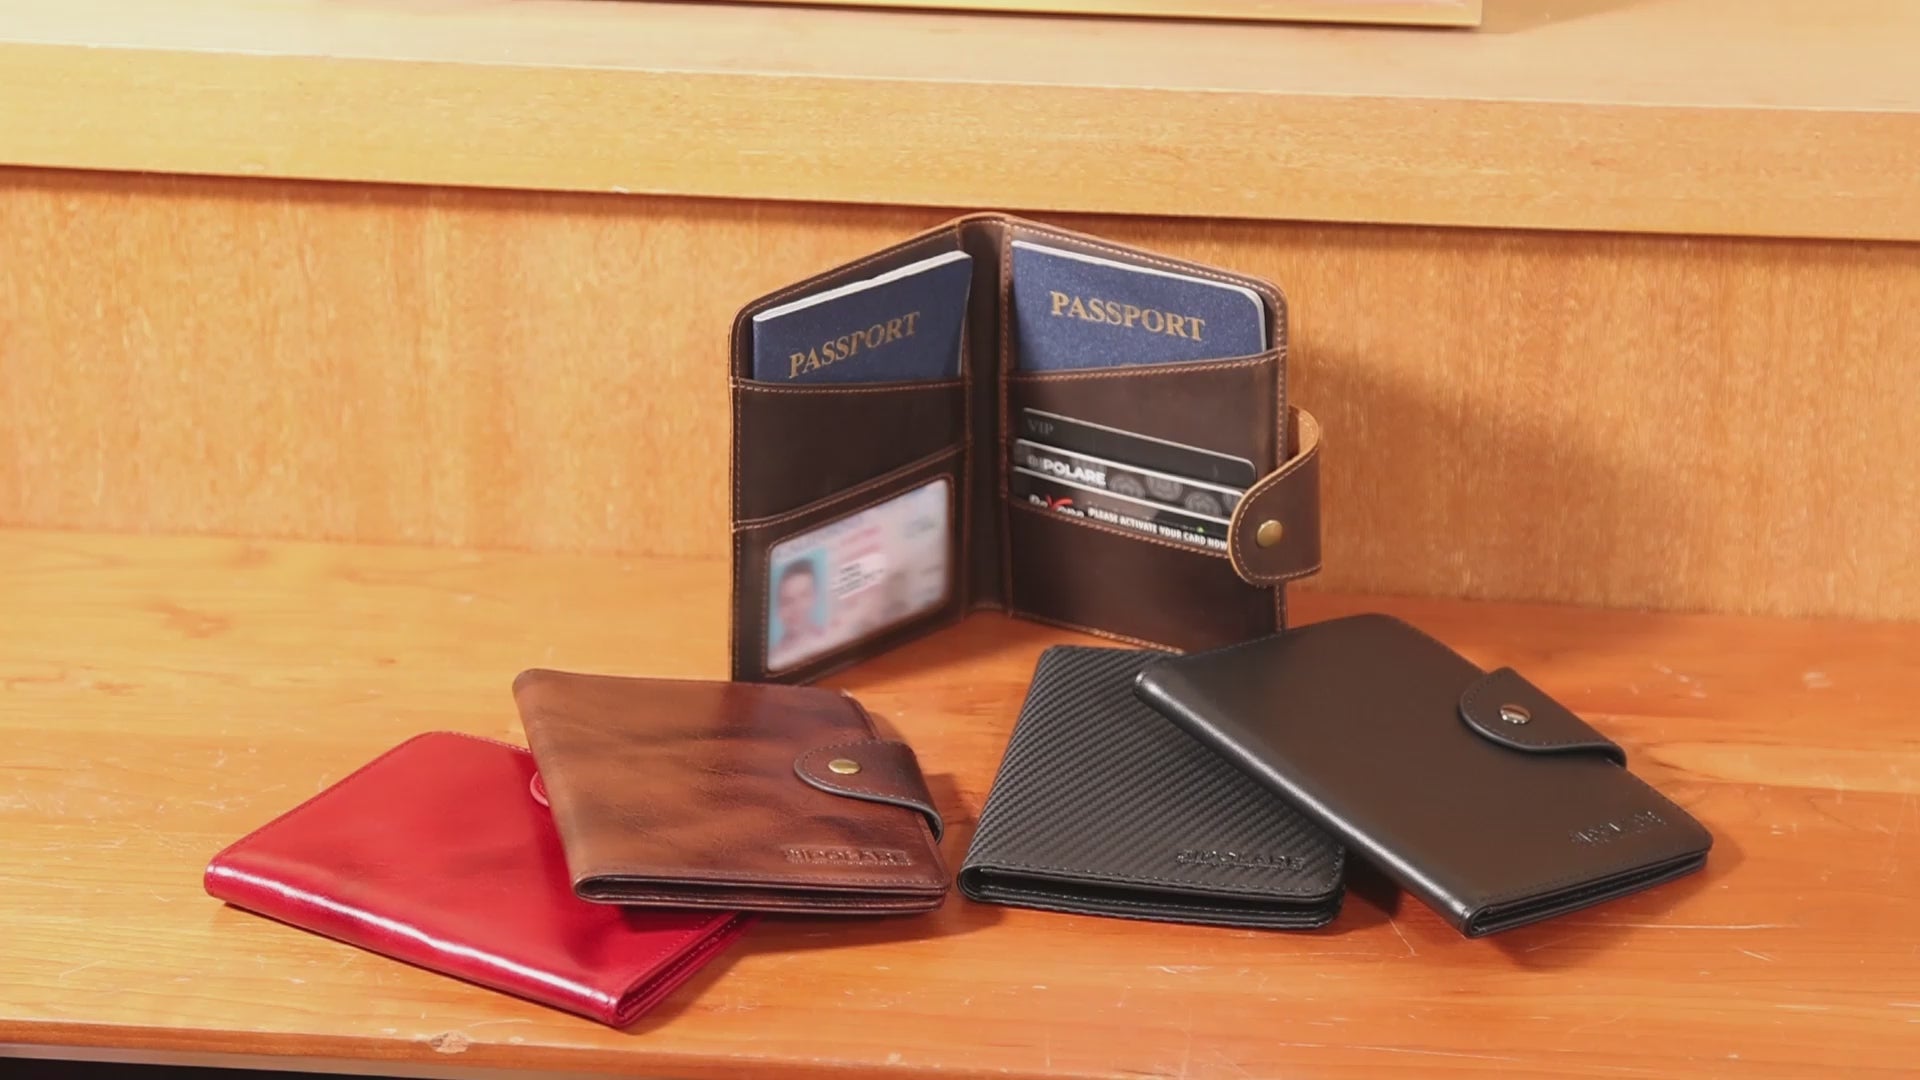 Polare Slim Curve Front Pocket RFID Blocking Italian Real Leather Bifold Wallet for Men Coffee